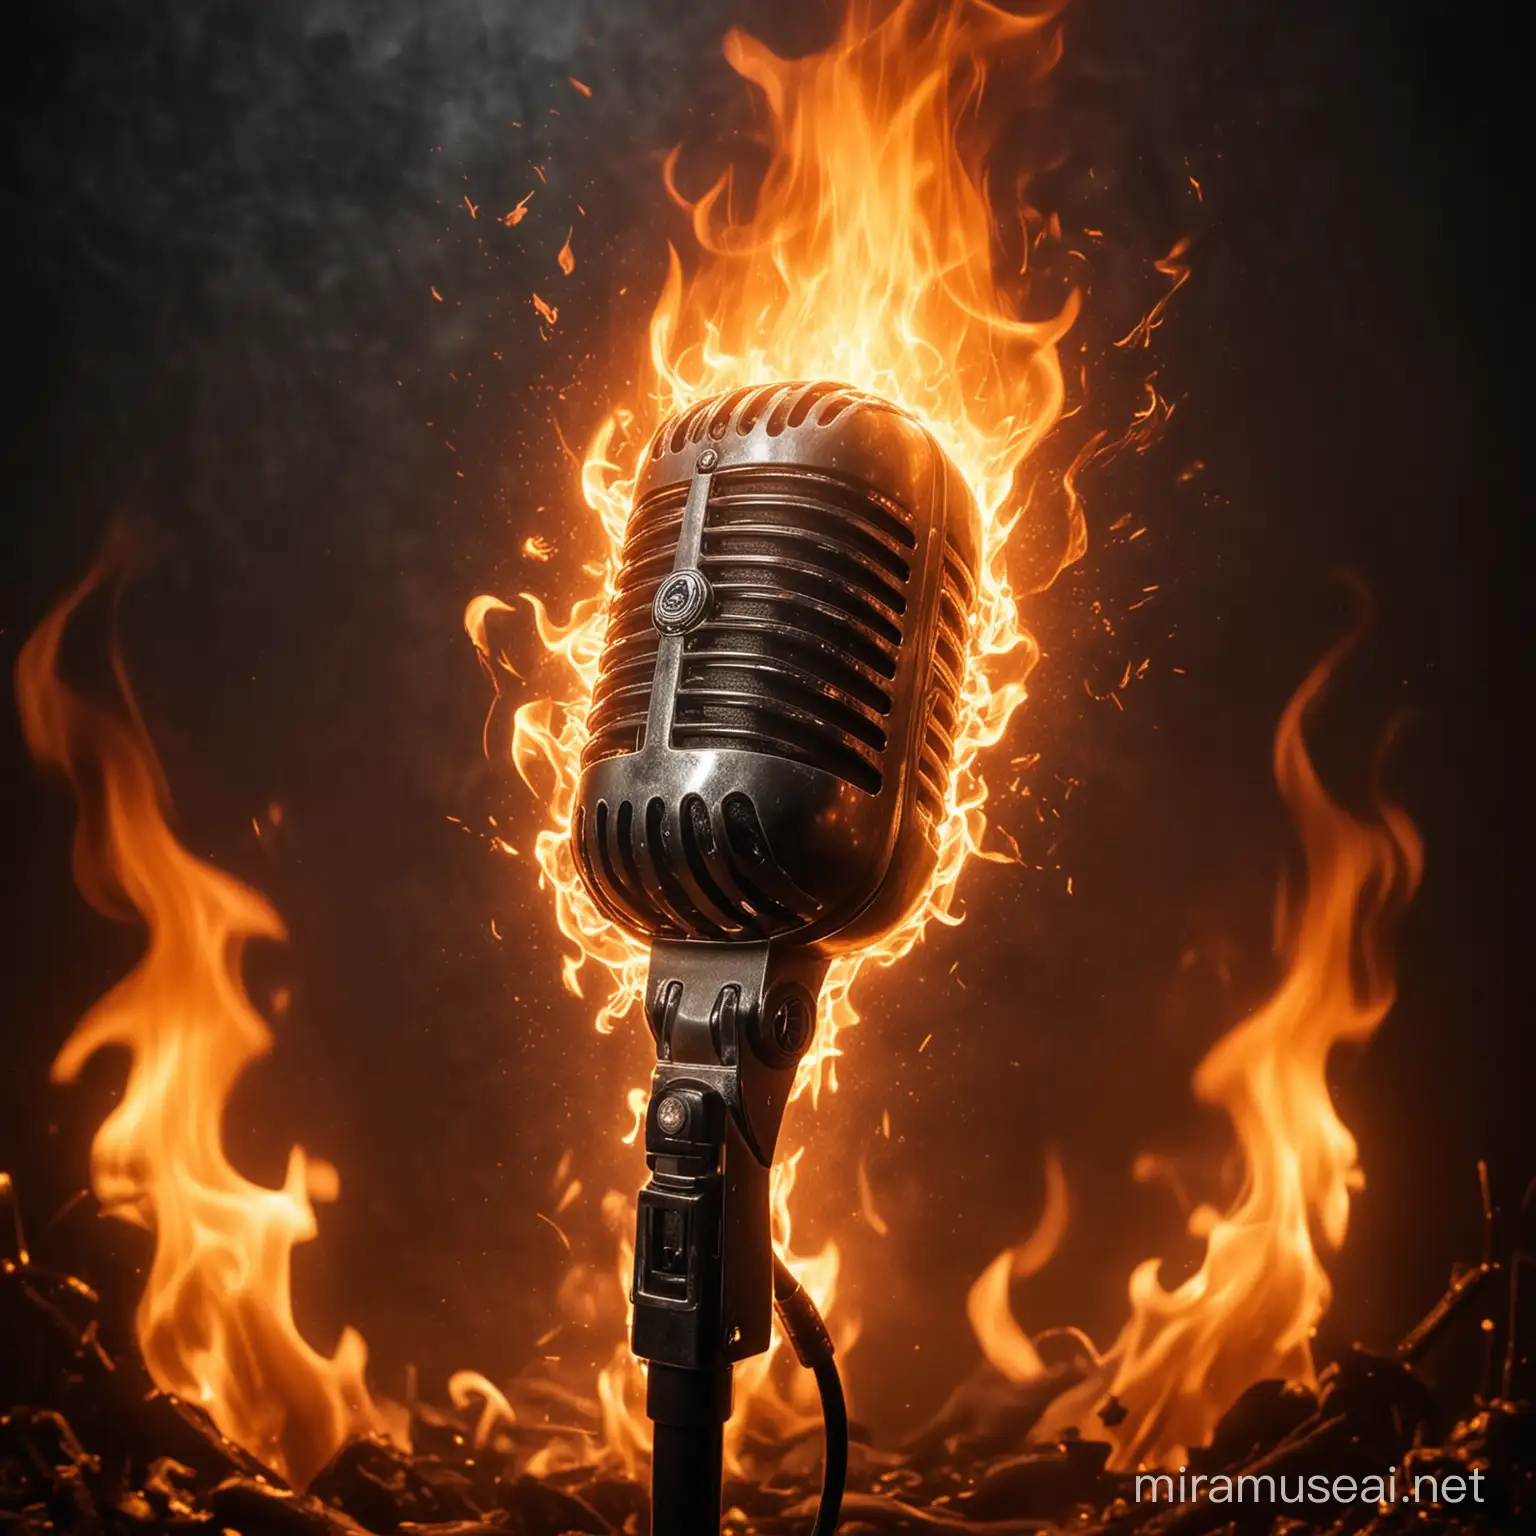 Vintage Microphone Engulfed in Fiery Flames